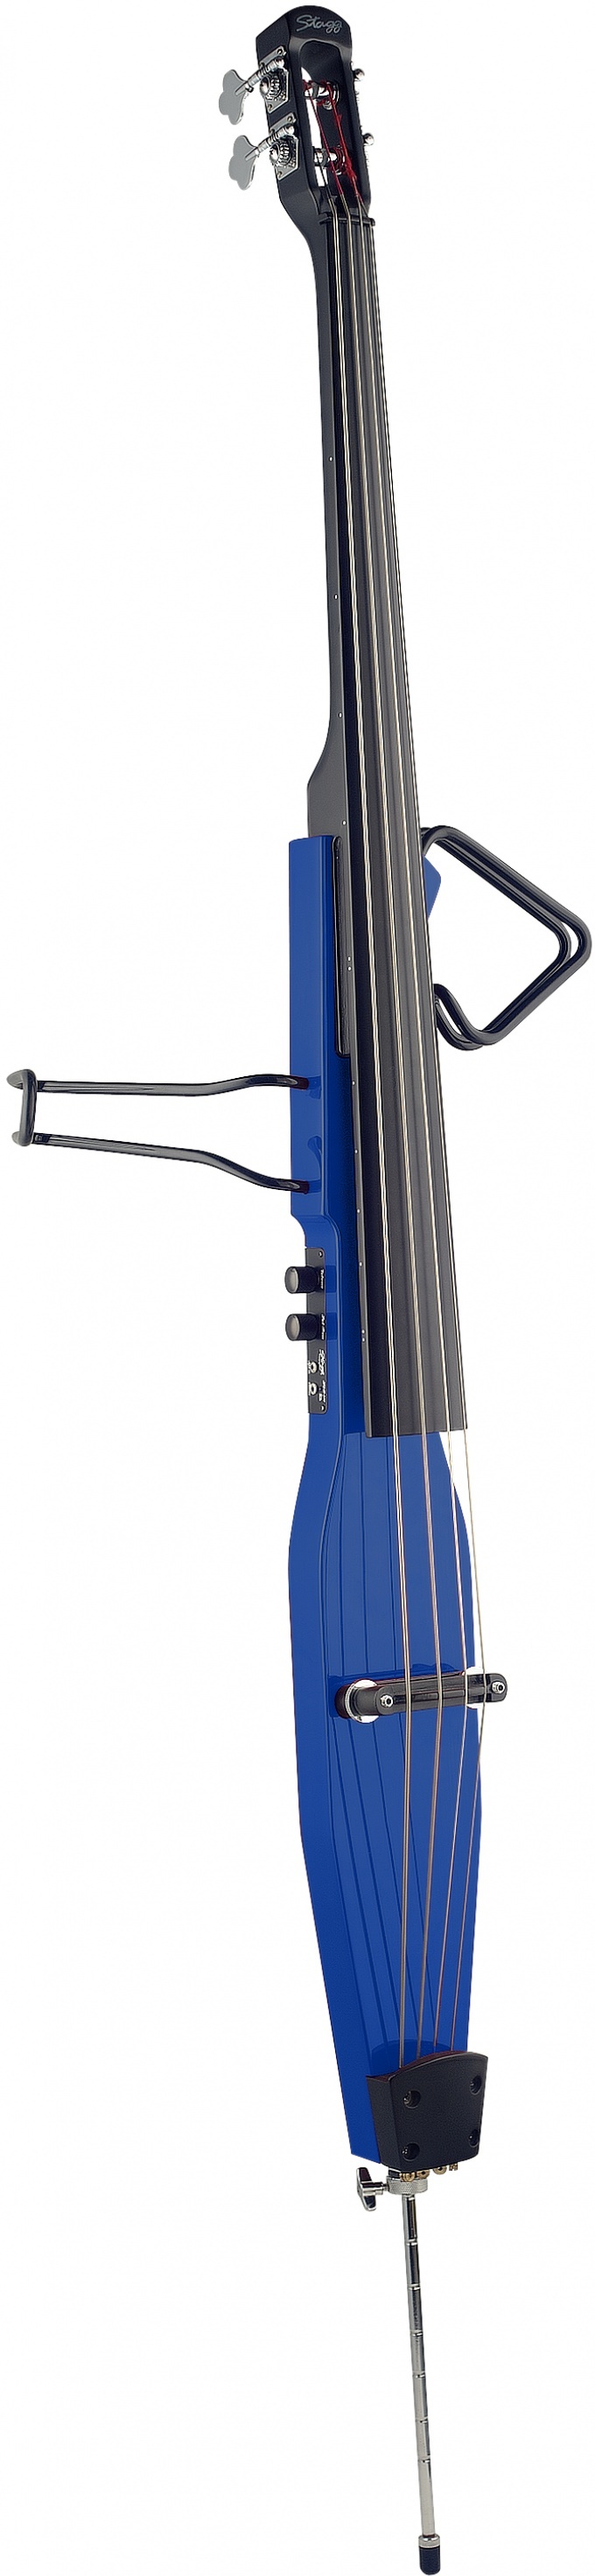 Stagg Edb-3/4 Tb - Electric double bass - Main picture